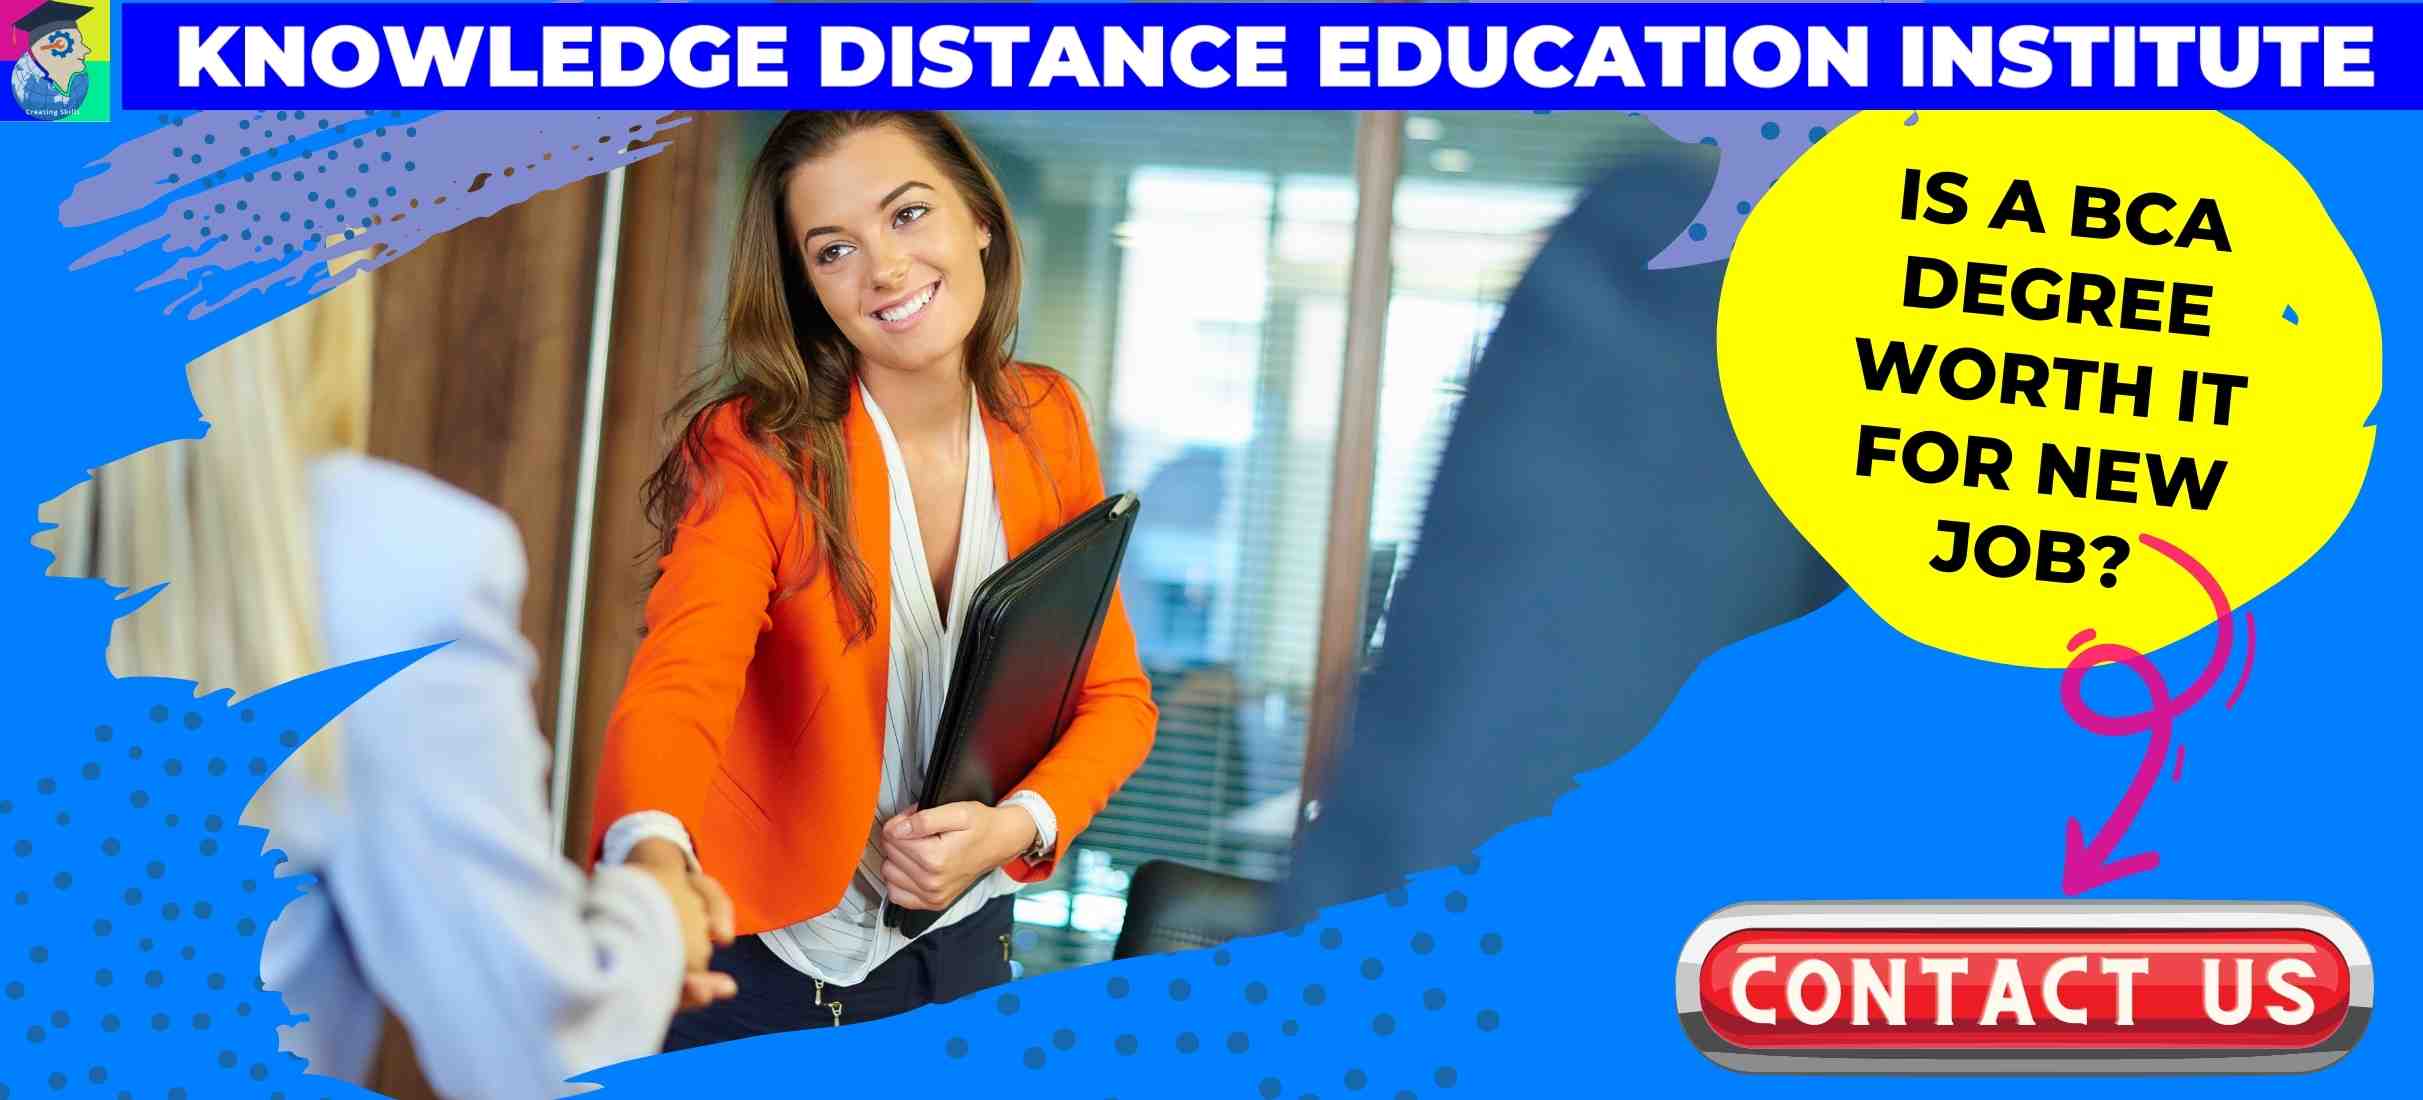  BCA | Bachelor Of Computer Applications - is 3 years degree course, offered in Distance, Online, Private, or  Regular Learning modes by UGC recognized Universities in India.  For career guidance you may contact Knowedge Distance Education Institute on +91 9029020524